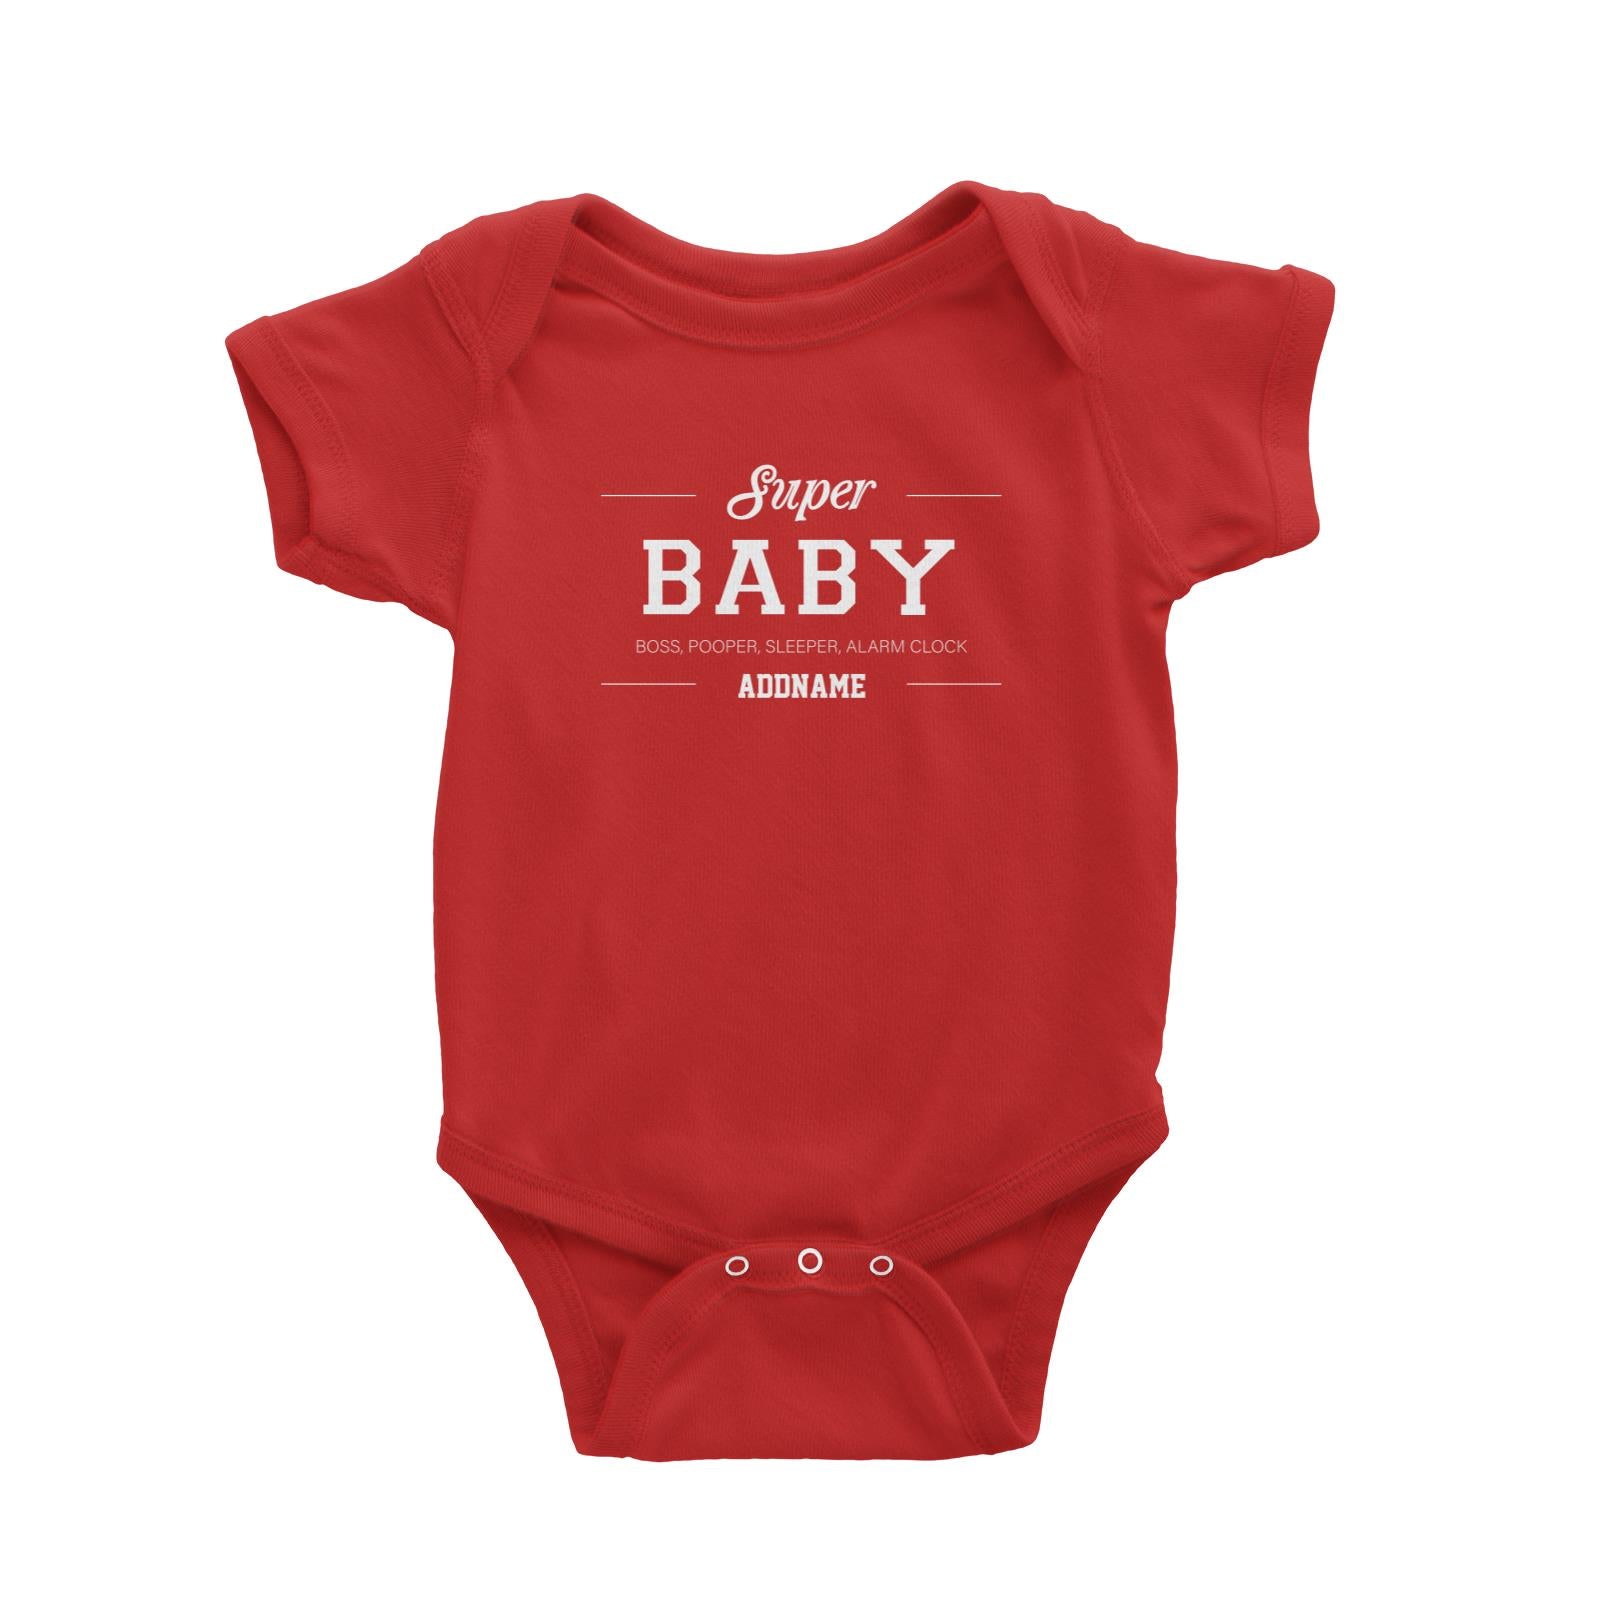 Super Definition Family Super Baby Addname Baby Romper